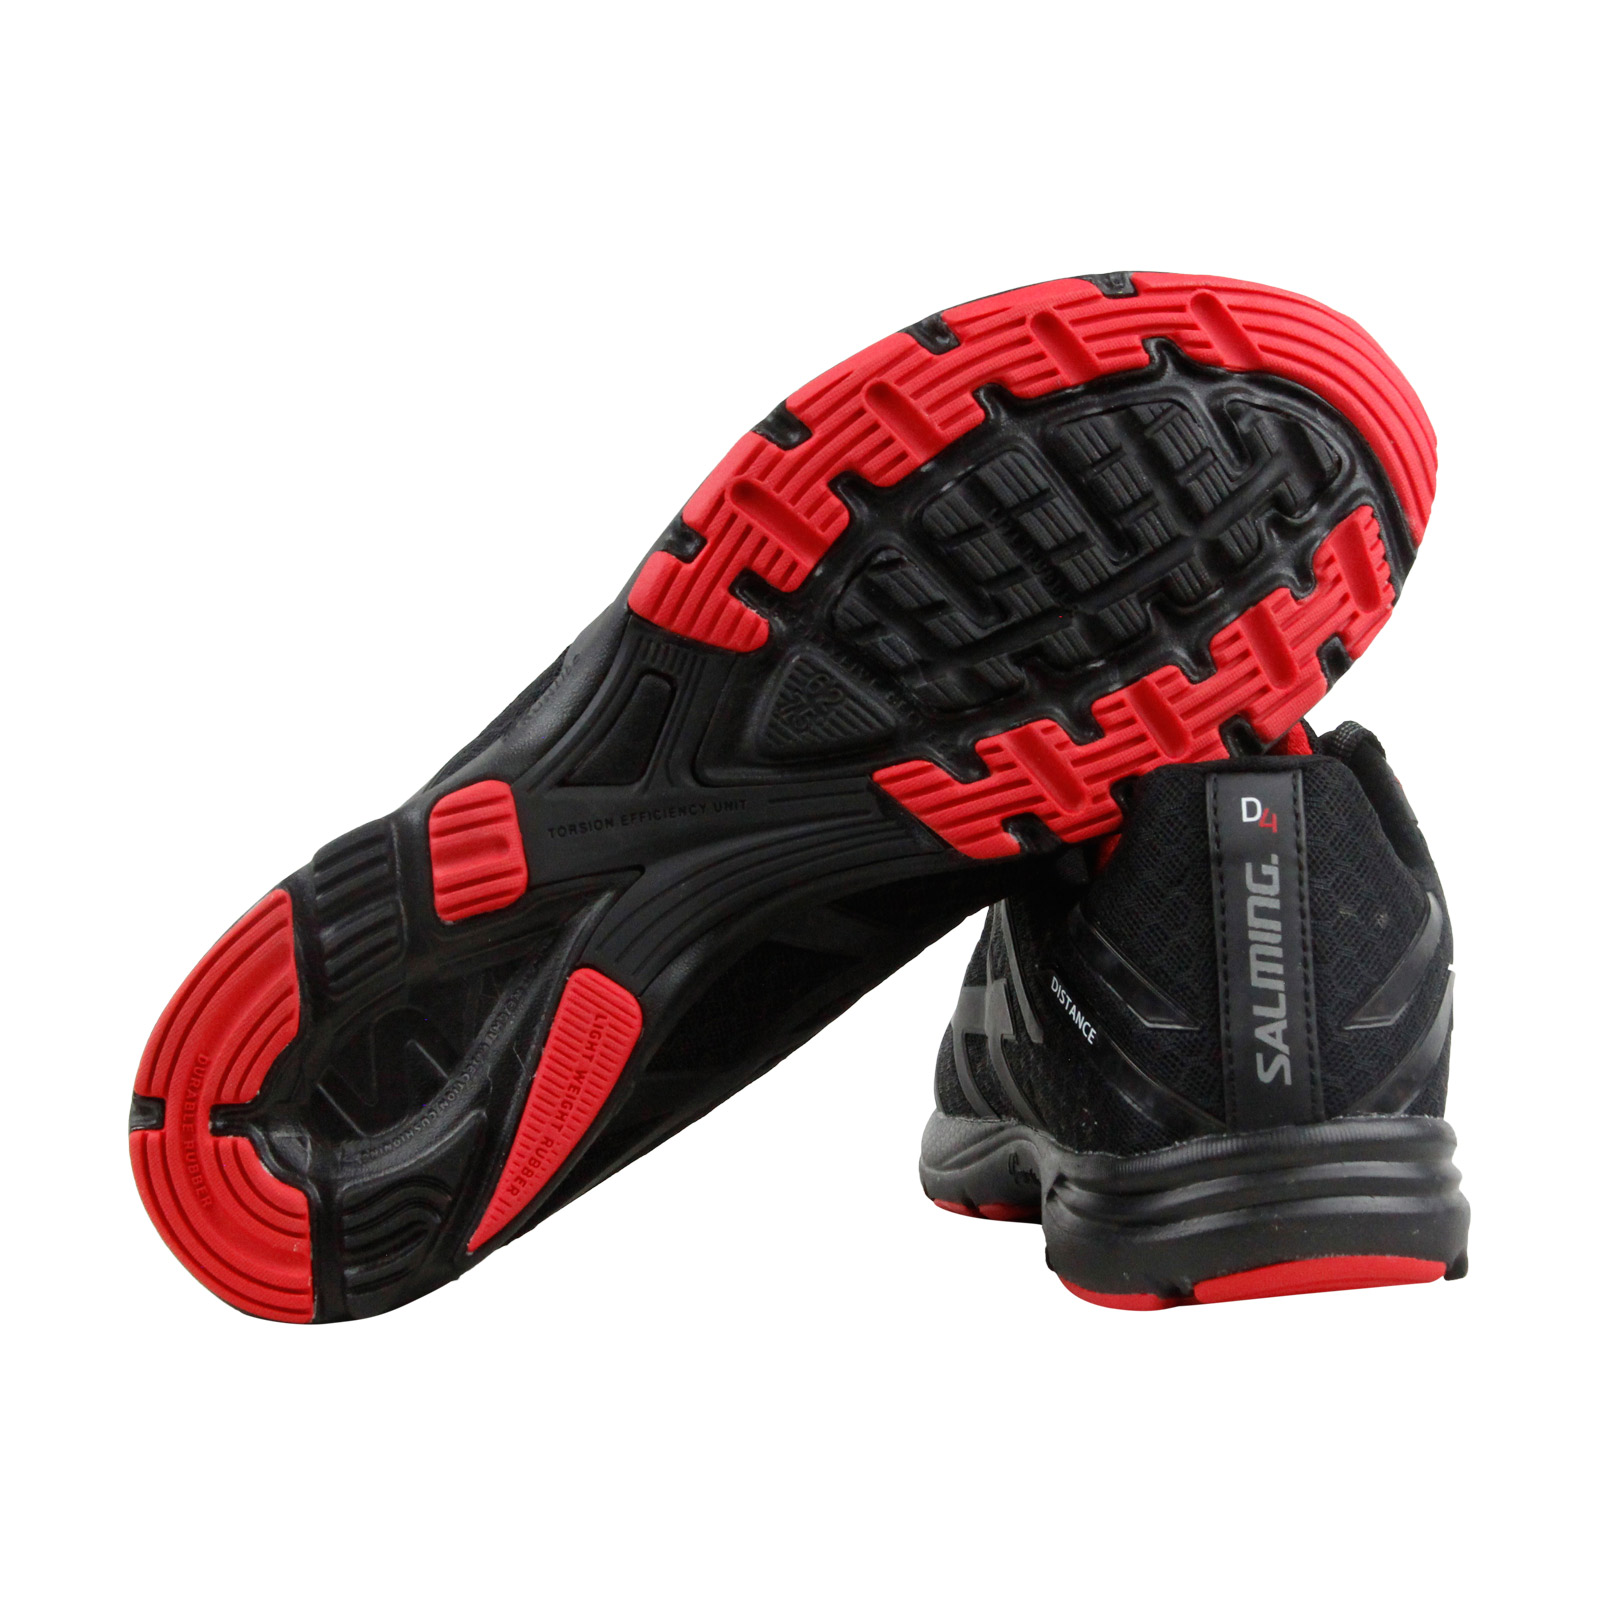 Salming Men's Distance D4 Black / Red Ankle-High Running Shoe - 12.5M - image 3 of 3